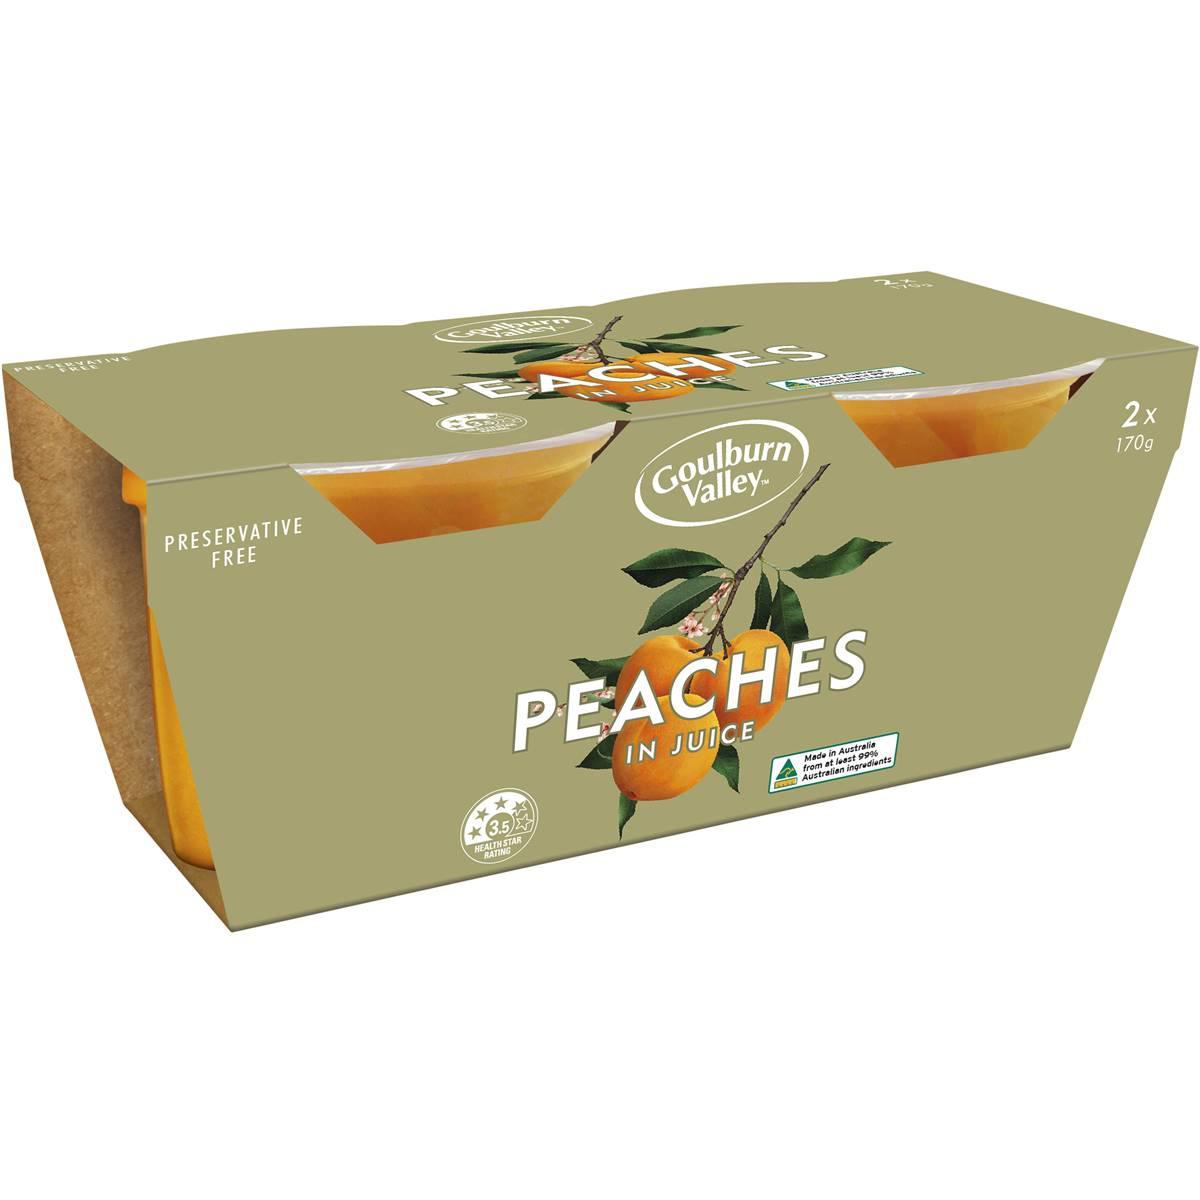 Goulburn Valley Peaches In Juice Fruit Cups 2x170g